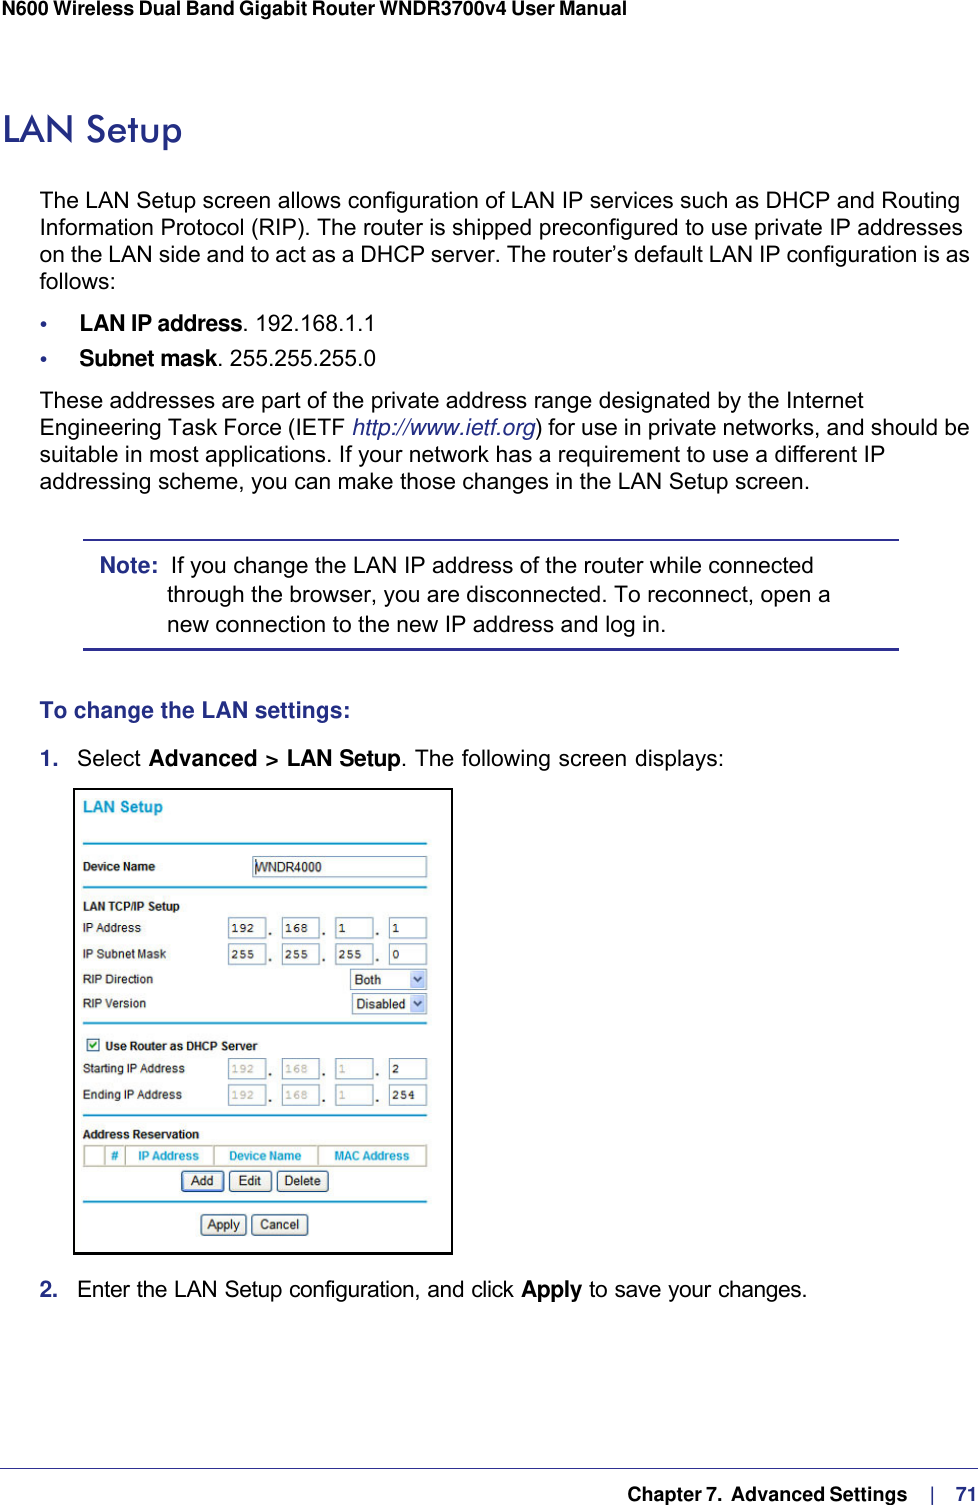   Chapter 7.  Advanced Settings     |    71N600 Wireless Dual Band Gigabit Router WNDR3700v4 User Manual LAN SetupThe LAN Setup screen allows configuration of LAN IP services such as DHCP and Routing Information Protocol (RIP). The router is shipped preconfigured to use private IP addresses on the LAN side and to act as a DHCP server. The router’s default LAN IP configuration is as follows:•     LAN IP address. 192.168.1.1•     Subnet mask. 255.255.255.0These addresses are part of the private address range designated by the Internet Engineering Task Force (IETF http://www.ietf.org) for use in private networks, and should be suitable in most applications. If your network has a requirement to use a different IP addressing scheme, you can make those changes in the LAN Setup screen.Note:  If you change the LAN IP address of the router while connected through the browser, you are disconnected. To reconnect, open a new connection to the new IP address and log in.To change the LAN settings:1.  Select Advanced &gt; LAN Setup. The following screen displays:2.  Enter the LAN Setup configuration, and click Apply to save your changes.